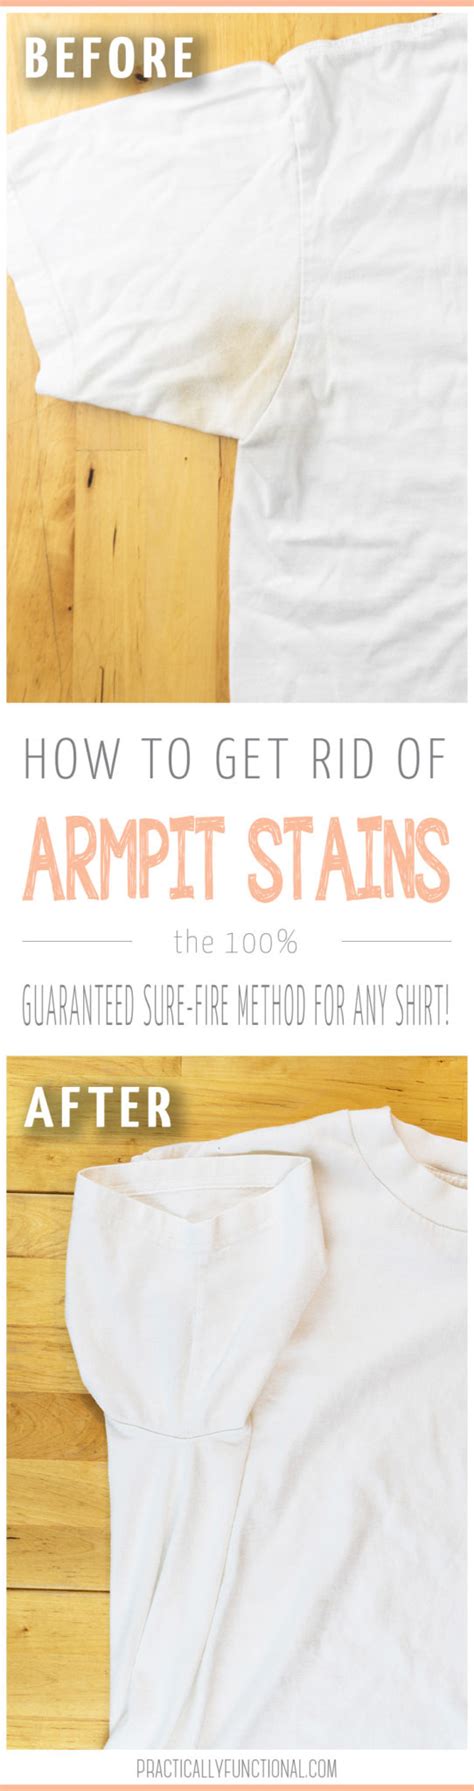 How To Remove Yellow Sweat Stains From Your Clothes The Easy Way